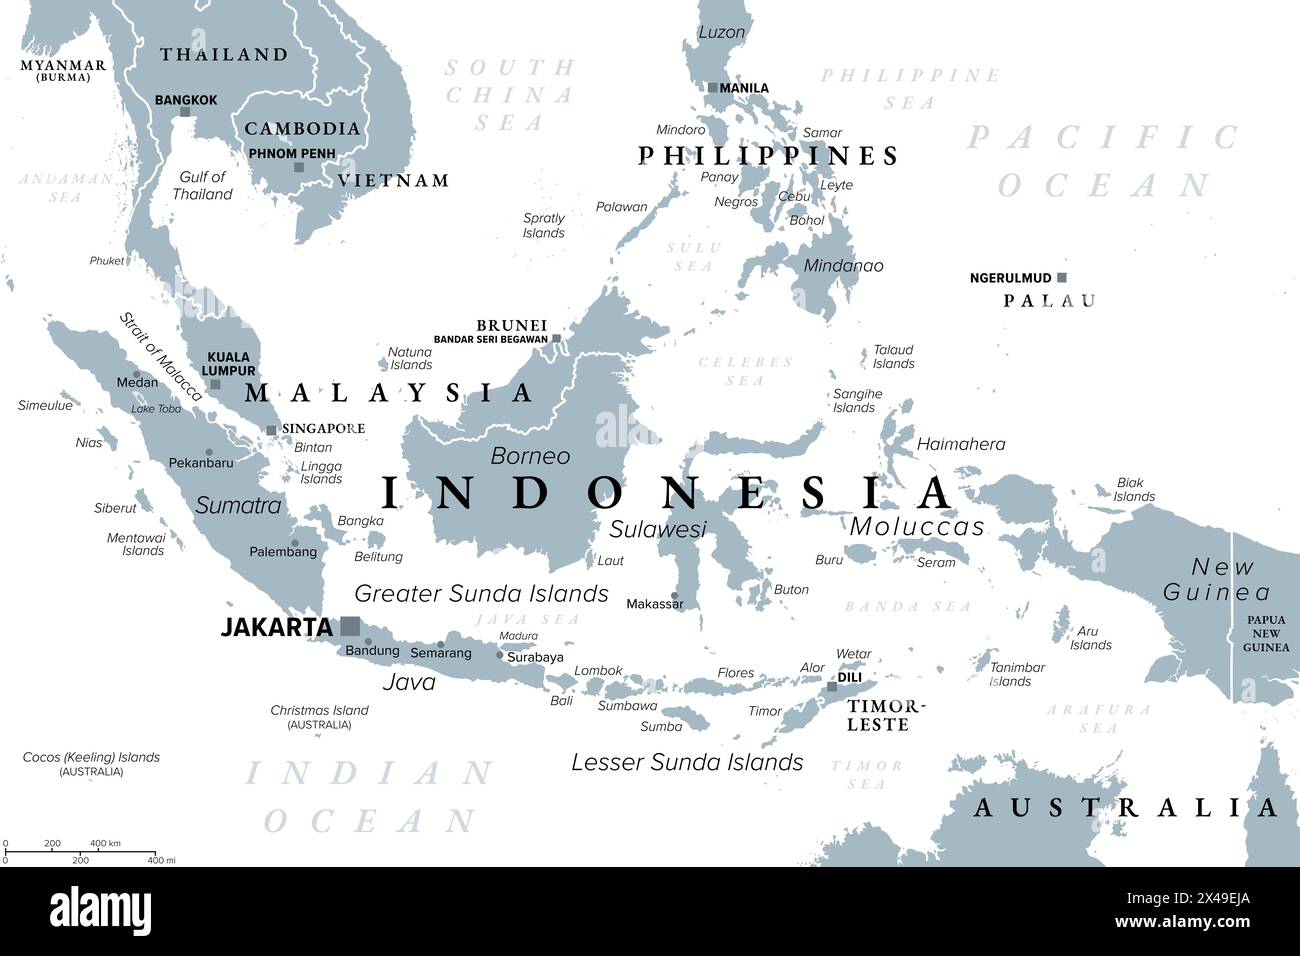 Indonesia, a country in Southeast Asia and Oceania, gray political map. Republic and archipelago with capital Jakarta. Stock Photo